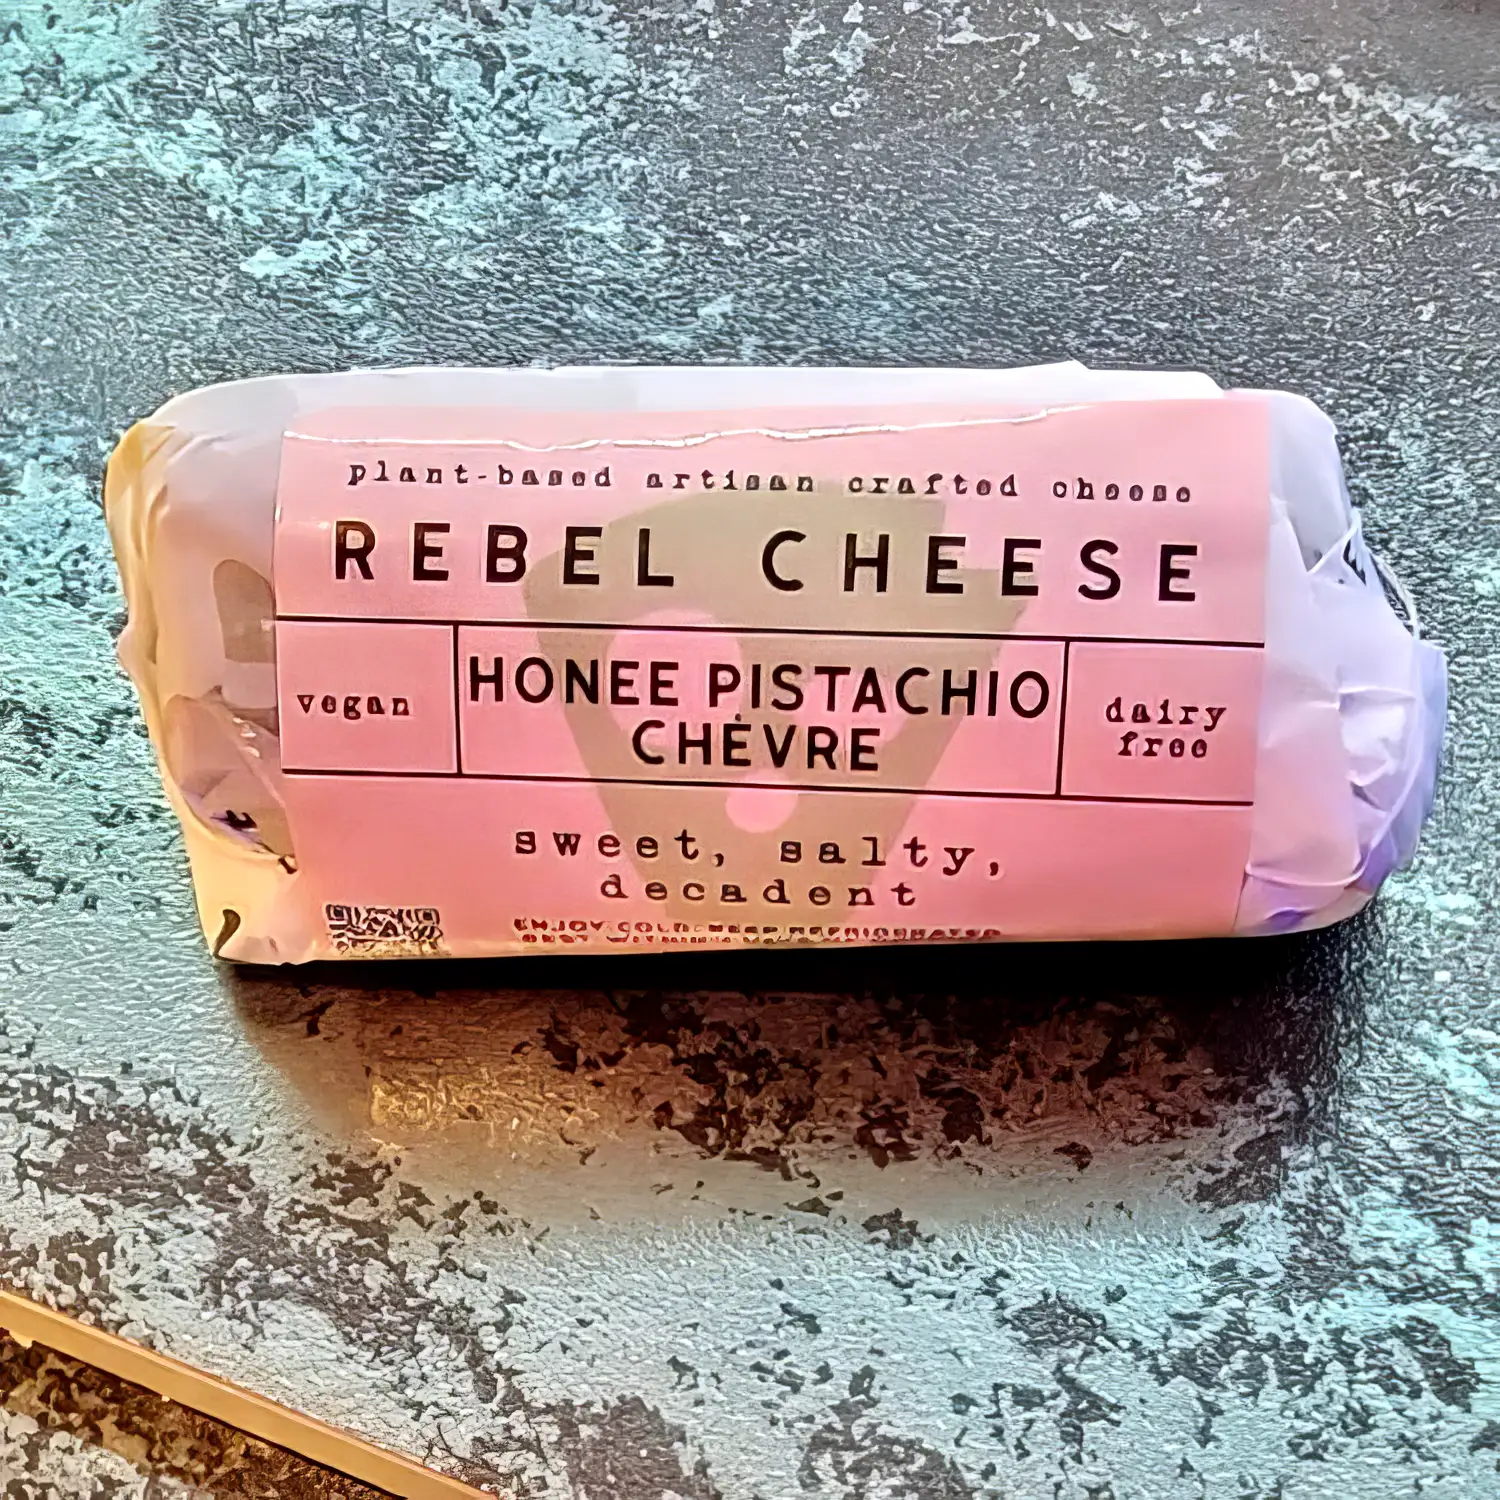 More Rebel Cheese!